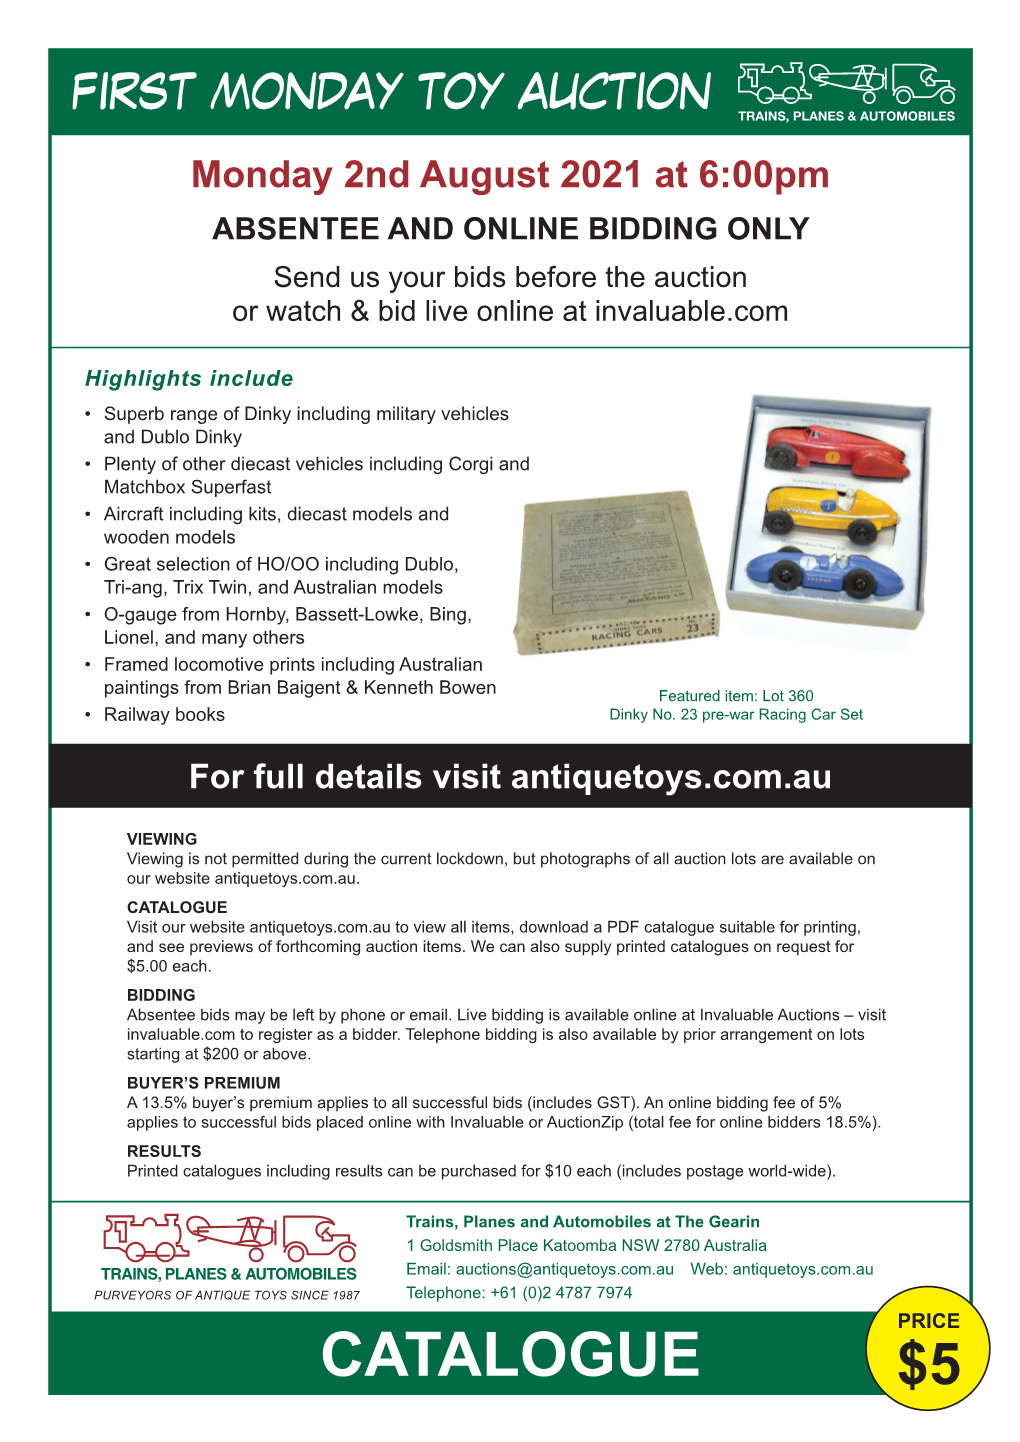 CATALOGUE Visit Our Website Antiquetoys.Com.Au to View All Items, Download a PDF Catalogue Suitable for Printing, and See Previews of Forthcoming Auction Items